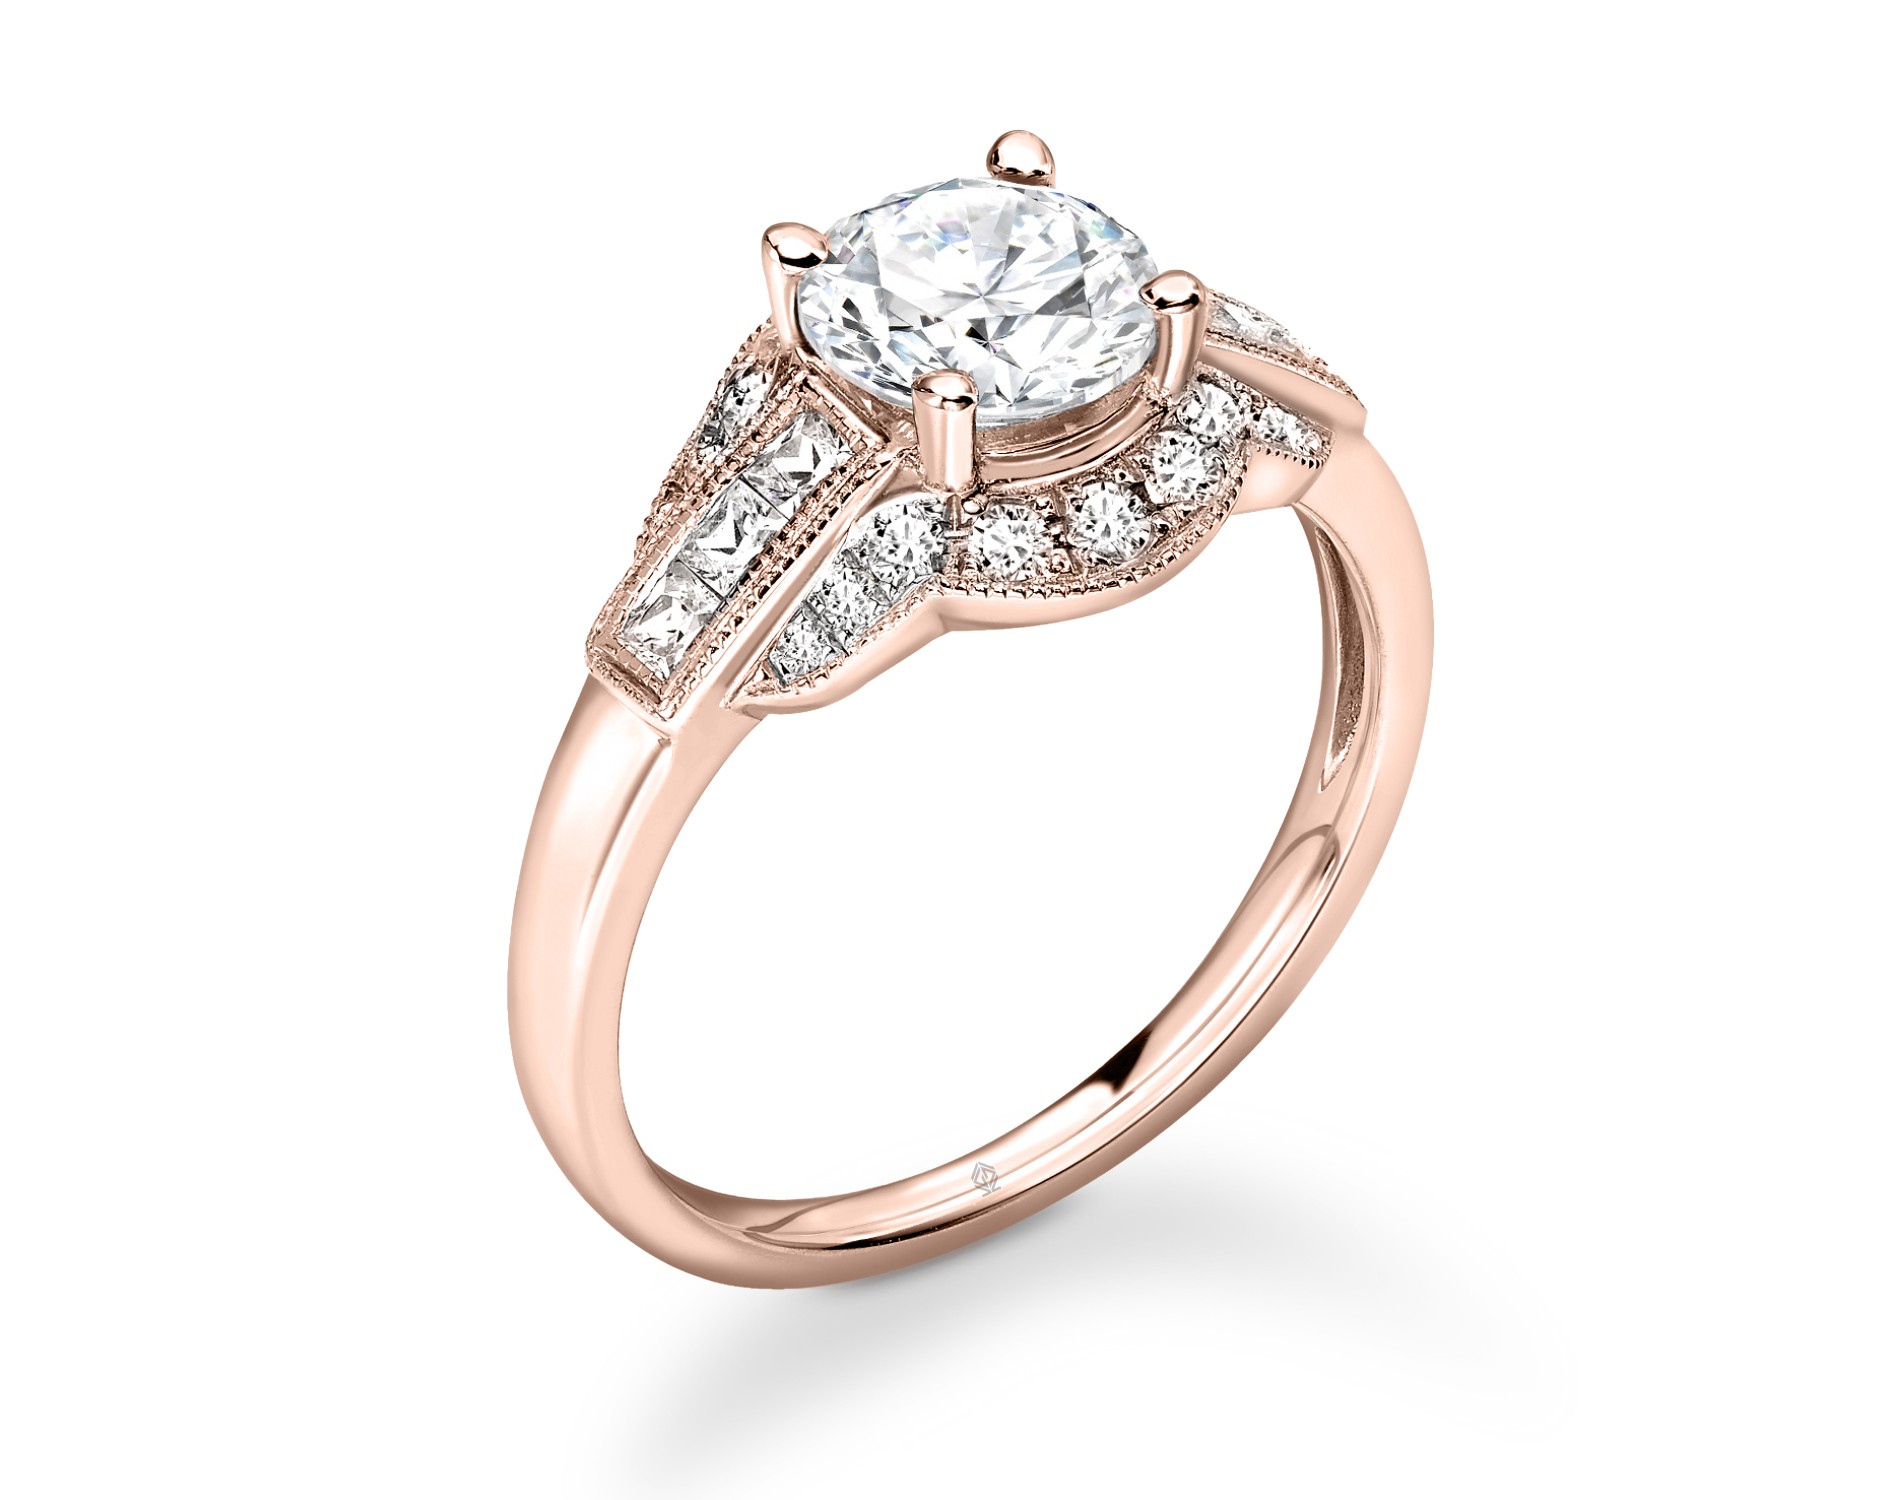 18K ROSE GOLD MILGRAIN HALO ROUND CUT DIAMOND ENGAGEMENT RING WITH SIDE DIAMONDS CHANNEL SET